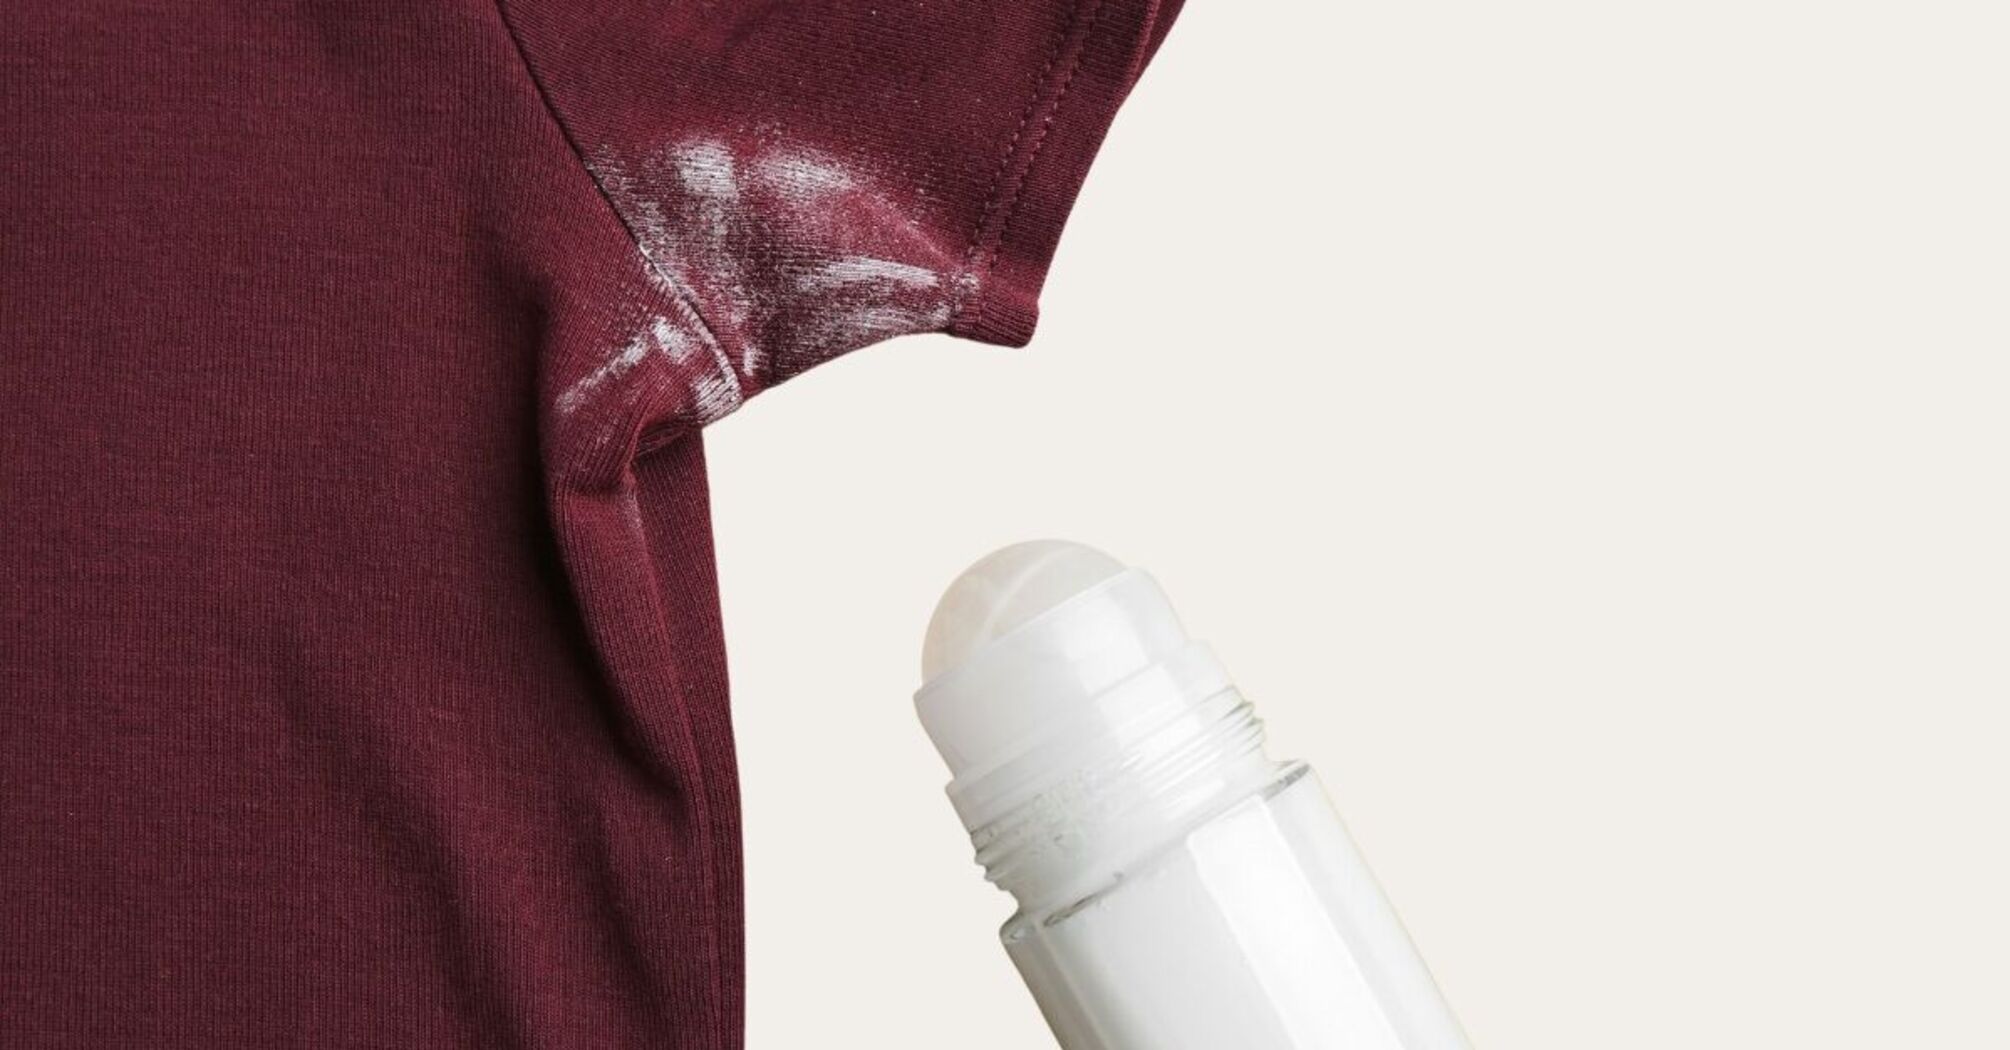 How to easily remove deodorant stains?